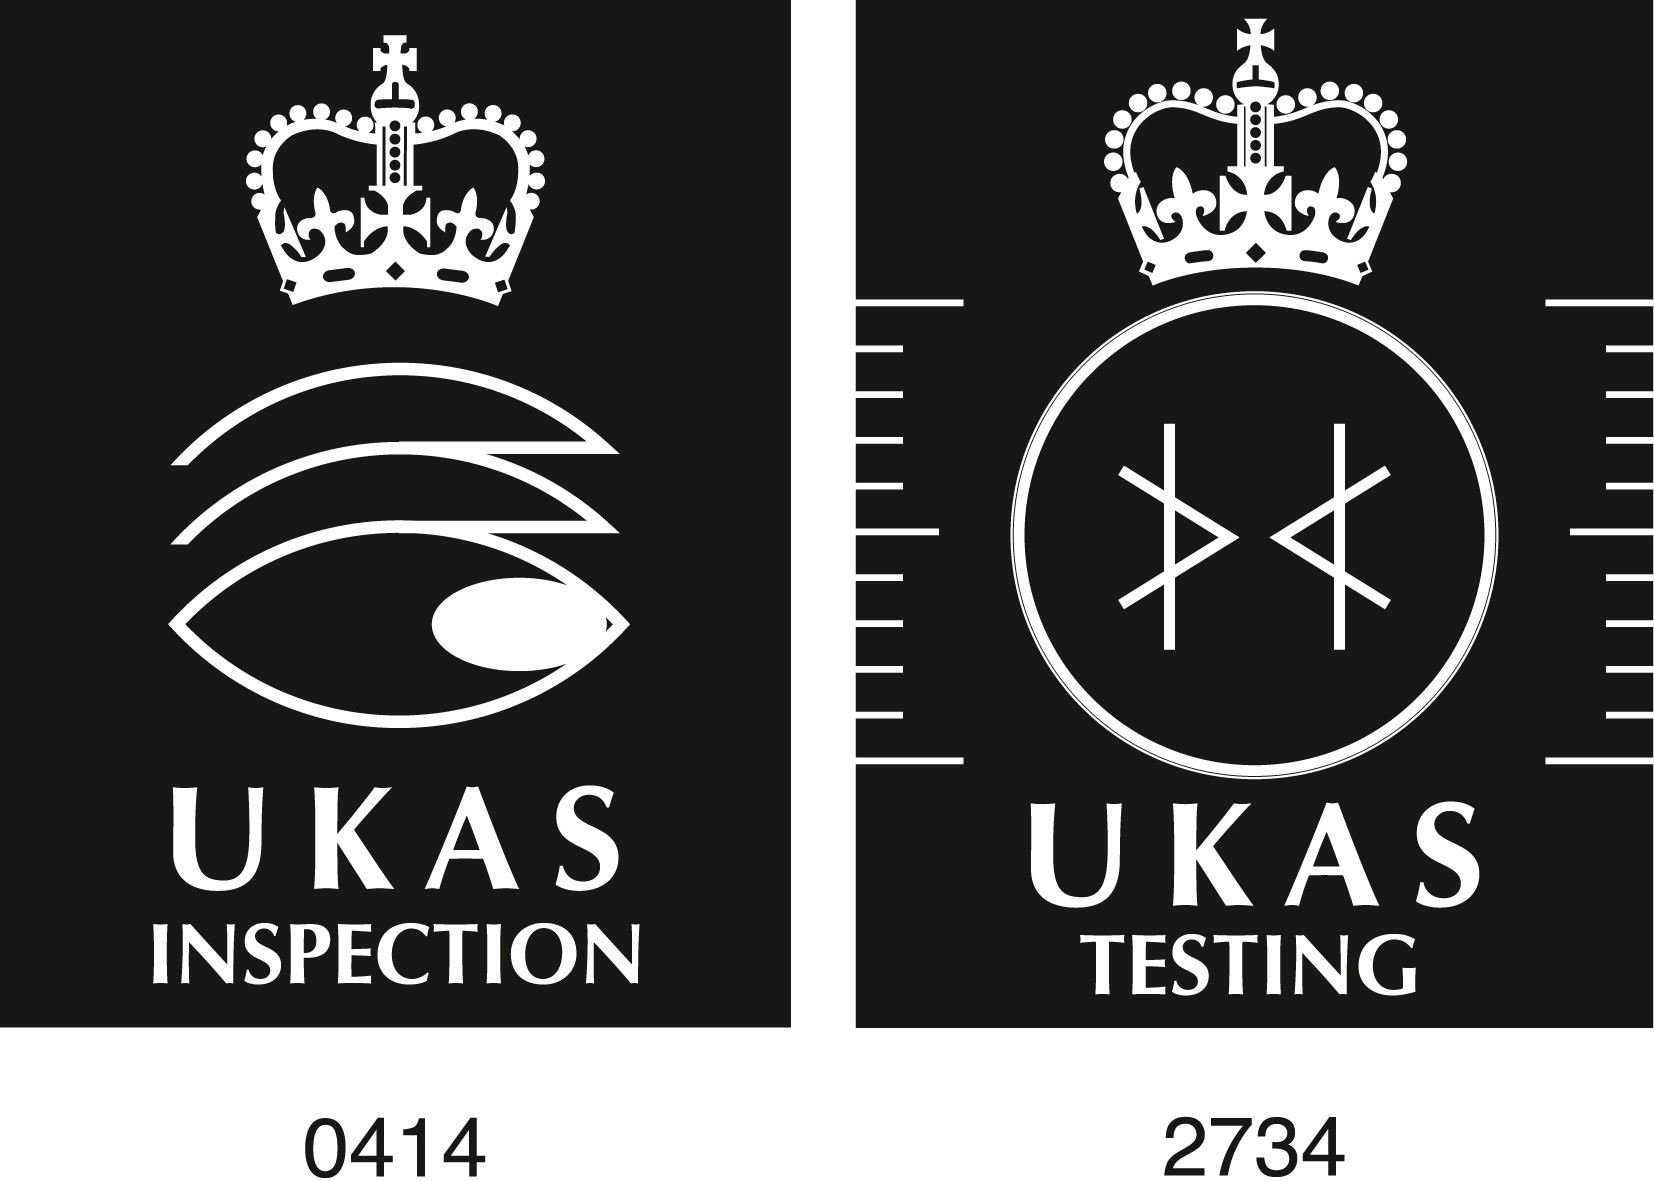 UKAS inspection and testing logos